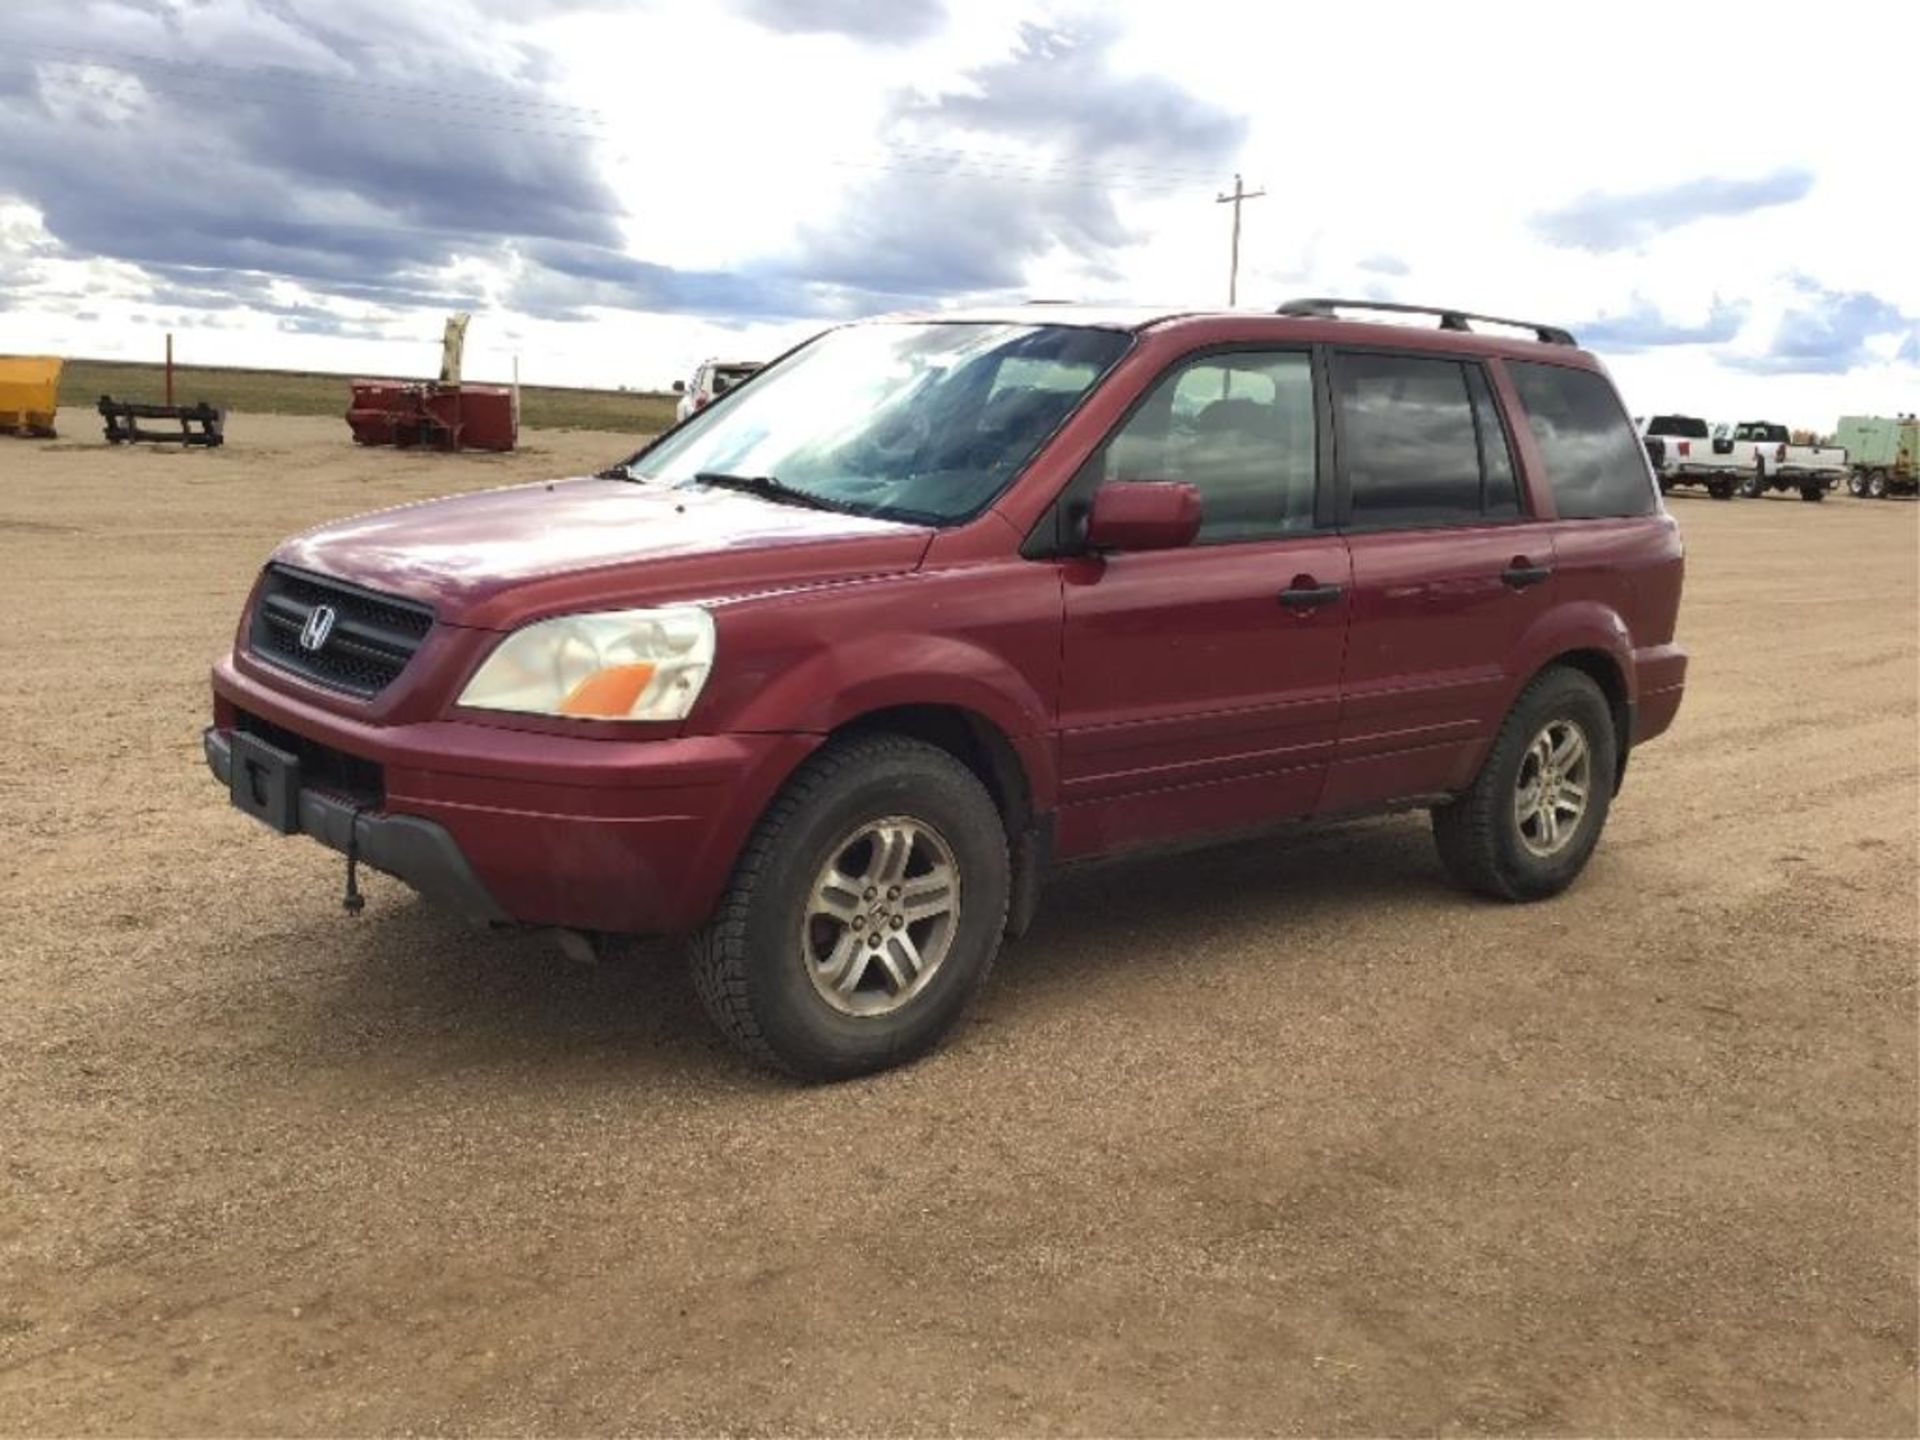 2003 Honda Pilot 4x4 SUV VIN 2HKYF18573H000088 3.5L Vtec Eng, A/T, 377,491km, 8-pass, Leather Int - Image 2 of 12